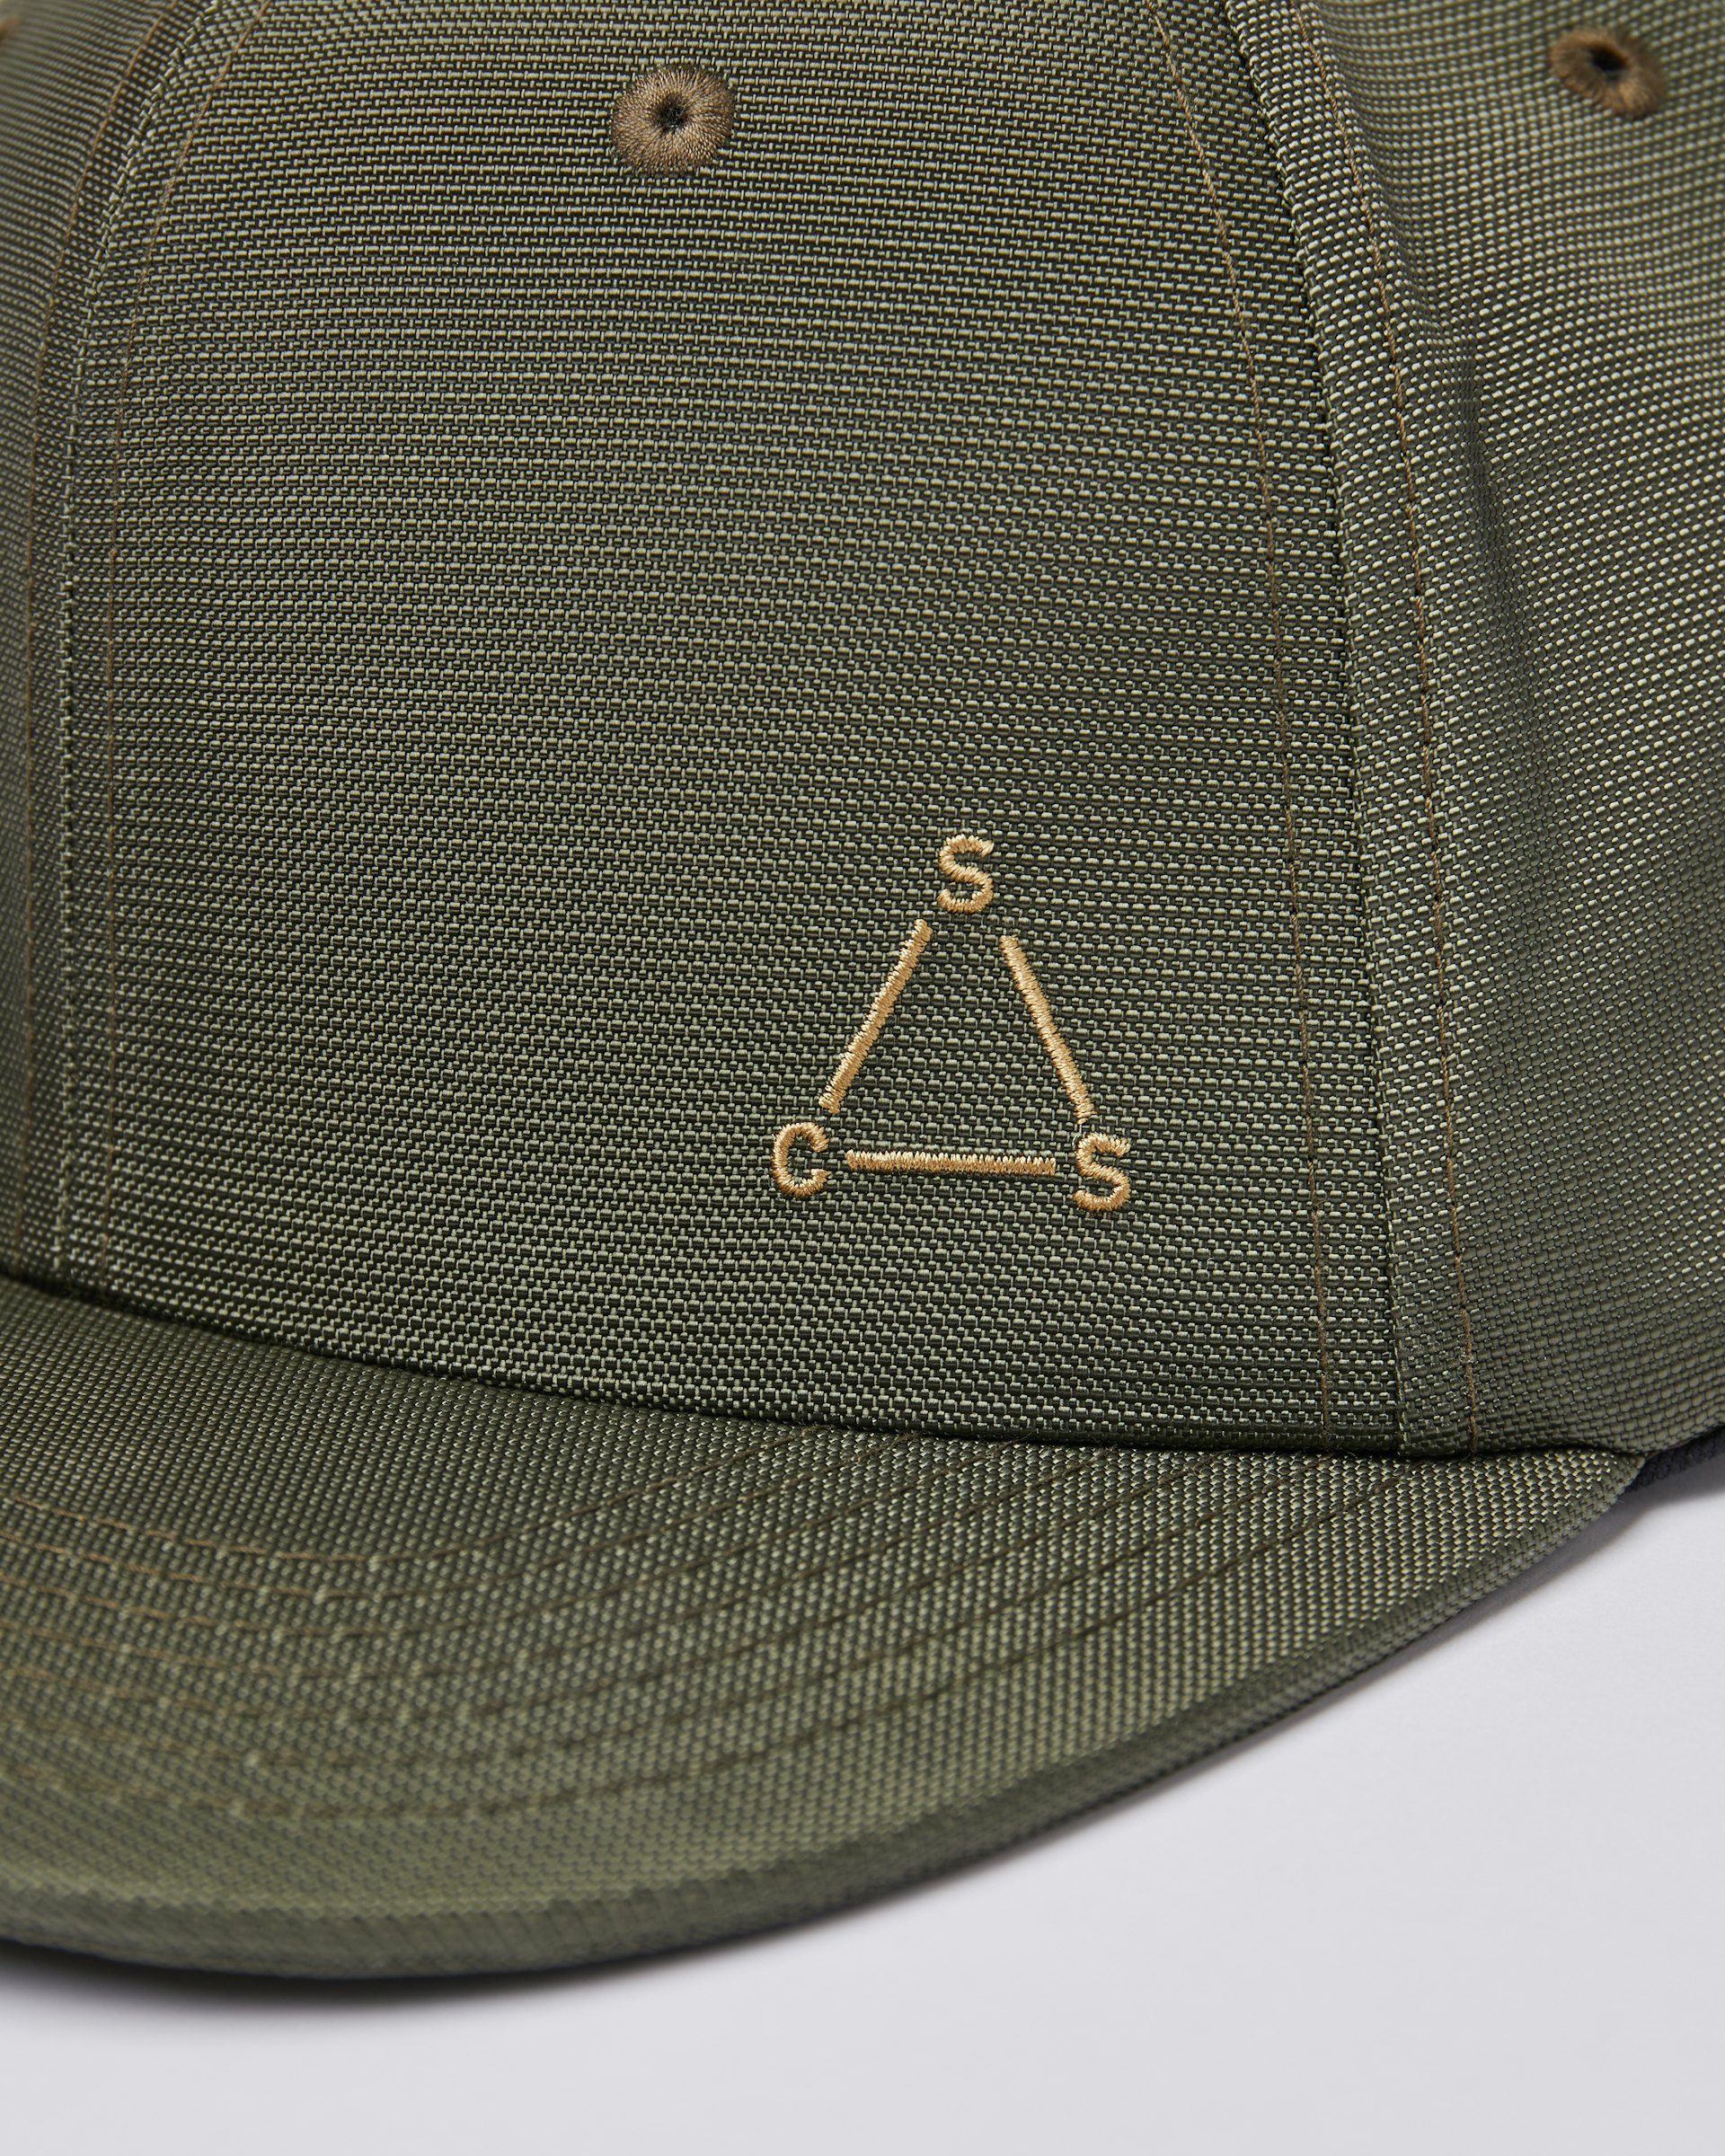 Hike Cap belongs to the category Items and is in color green (2 of 4)